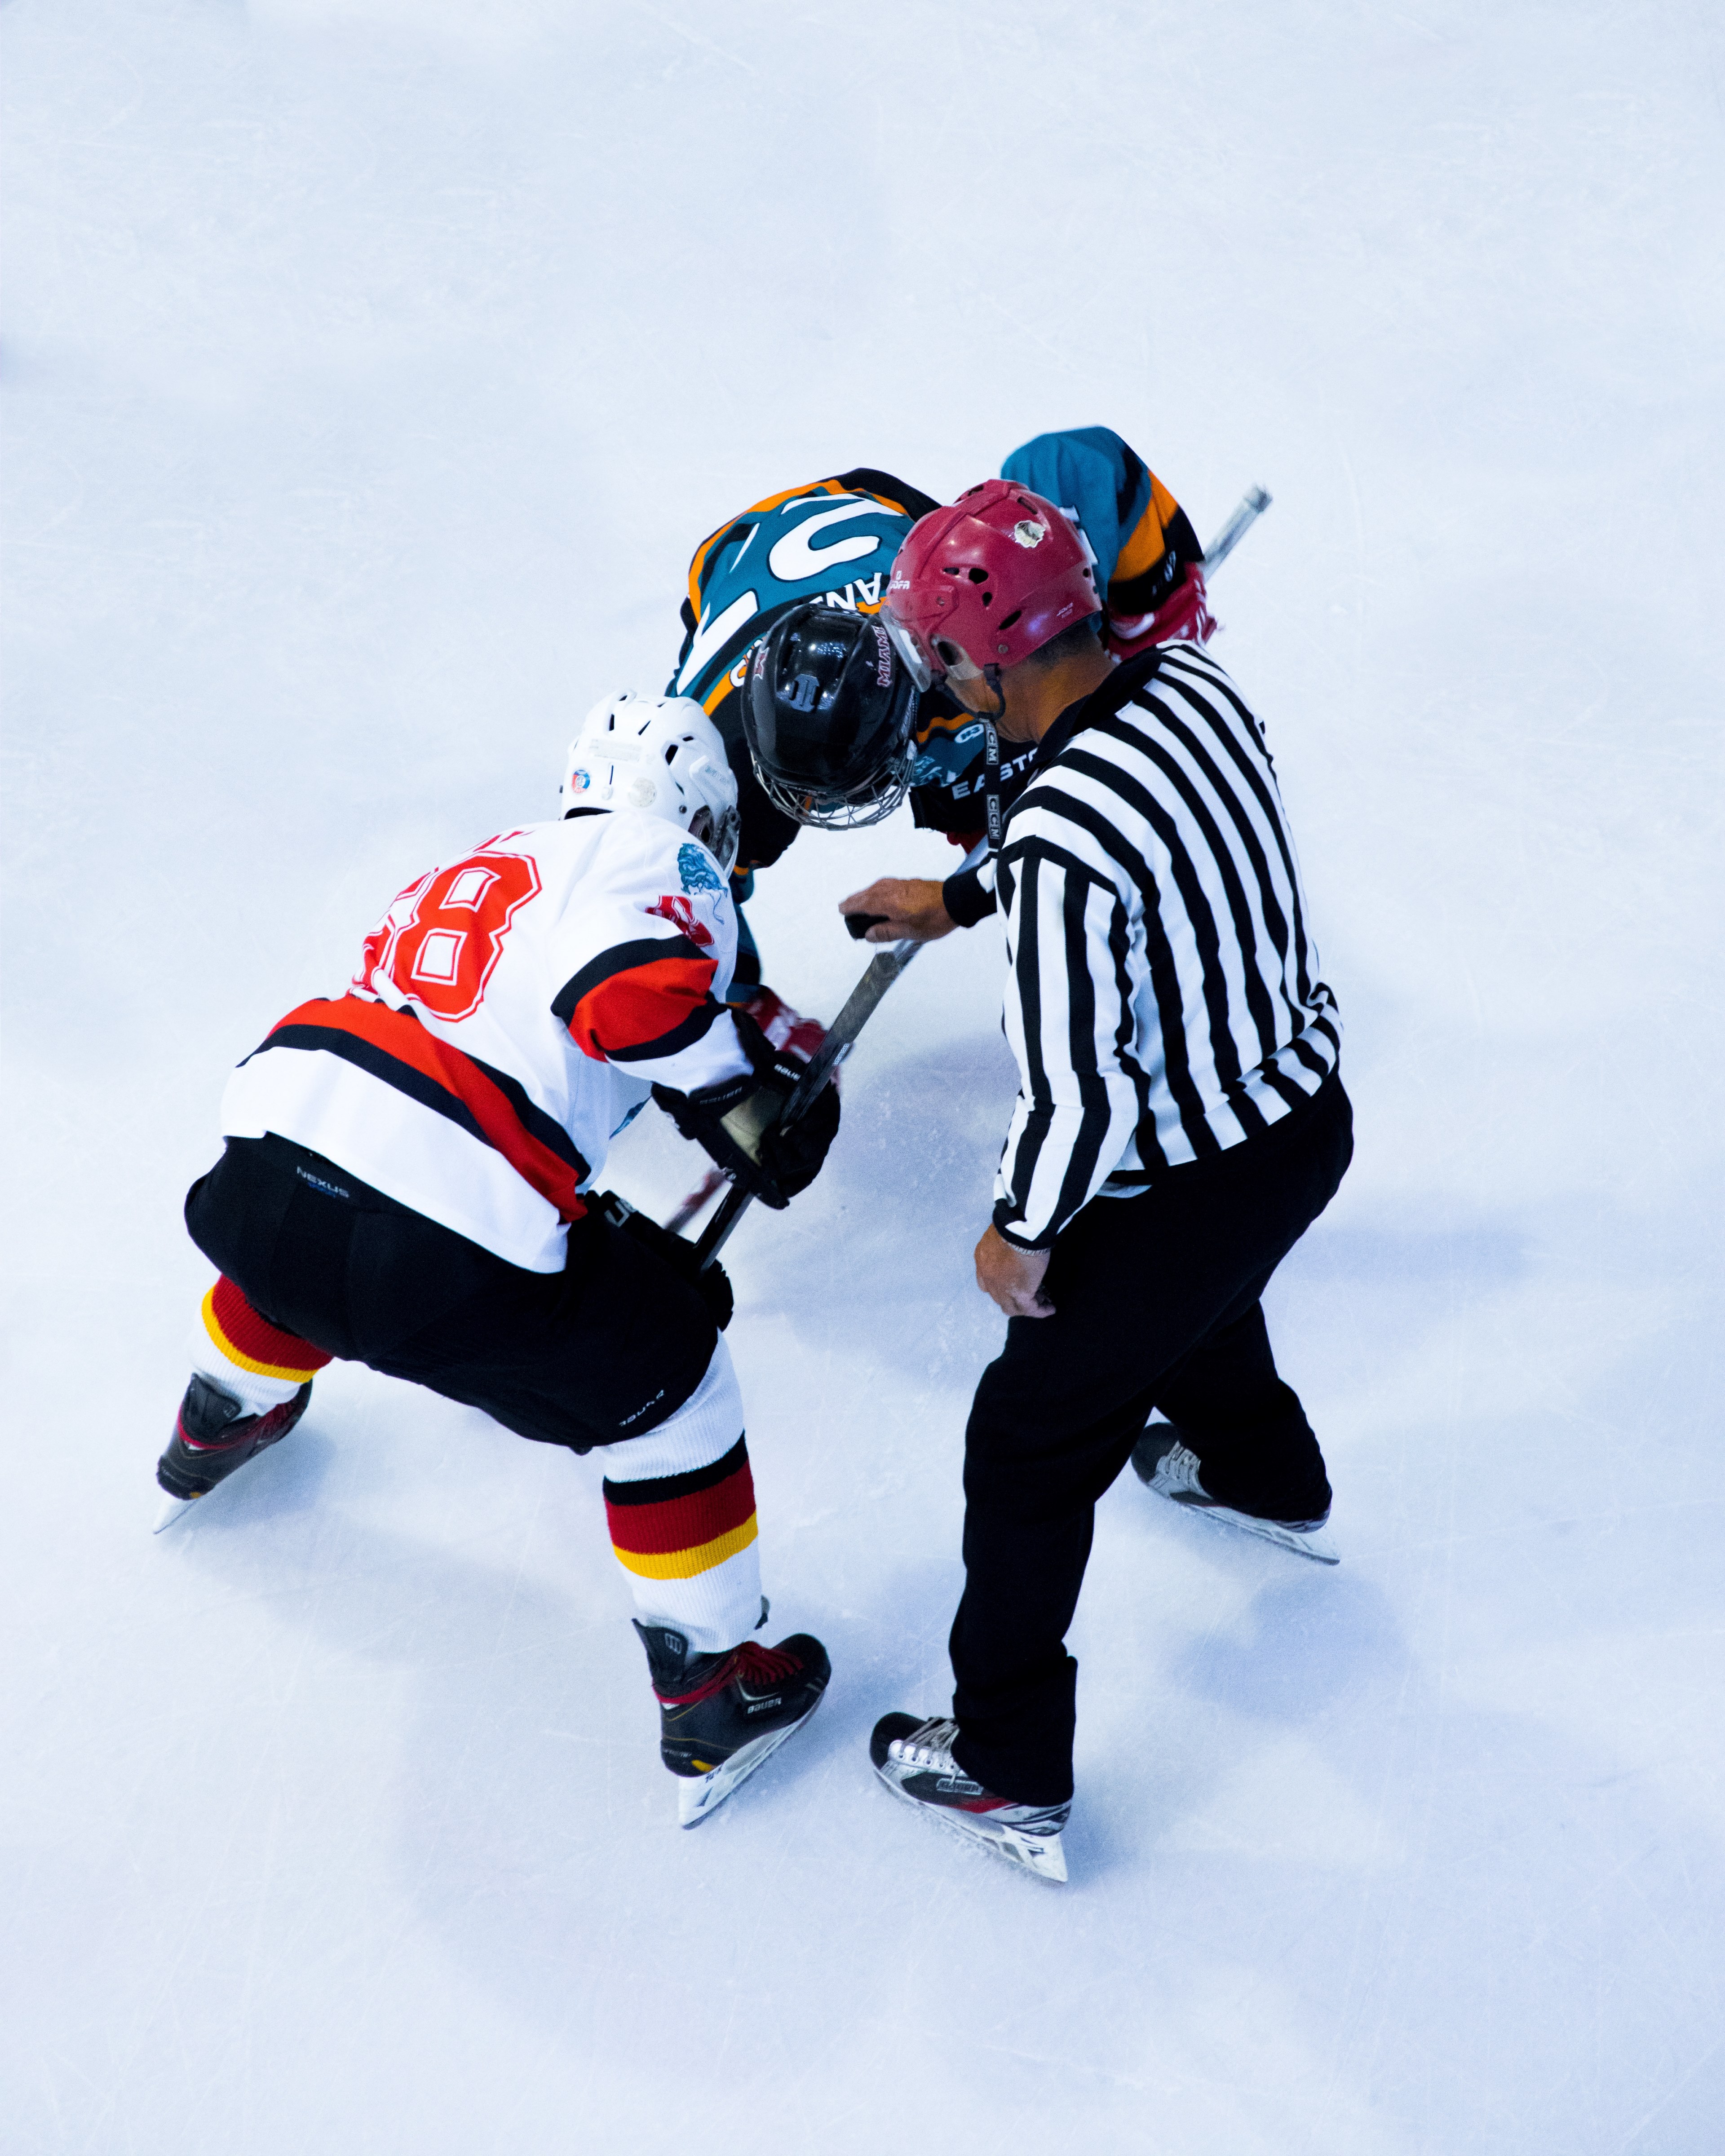 Wallpaper / two hockey players waiting for the ref to drop the puck during a faceoff, ice hockey 4k wallpaper free download